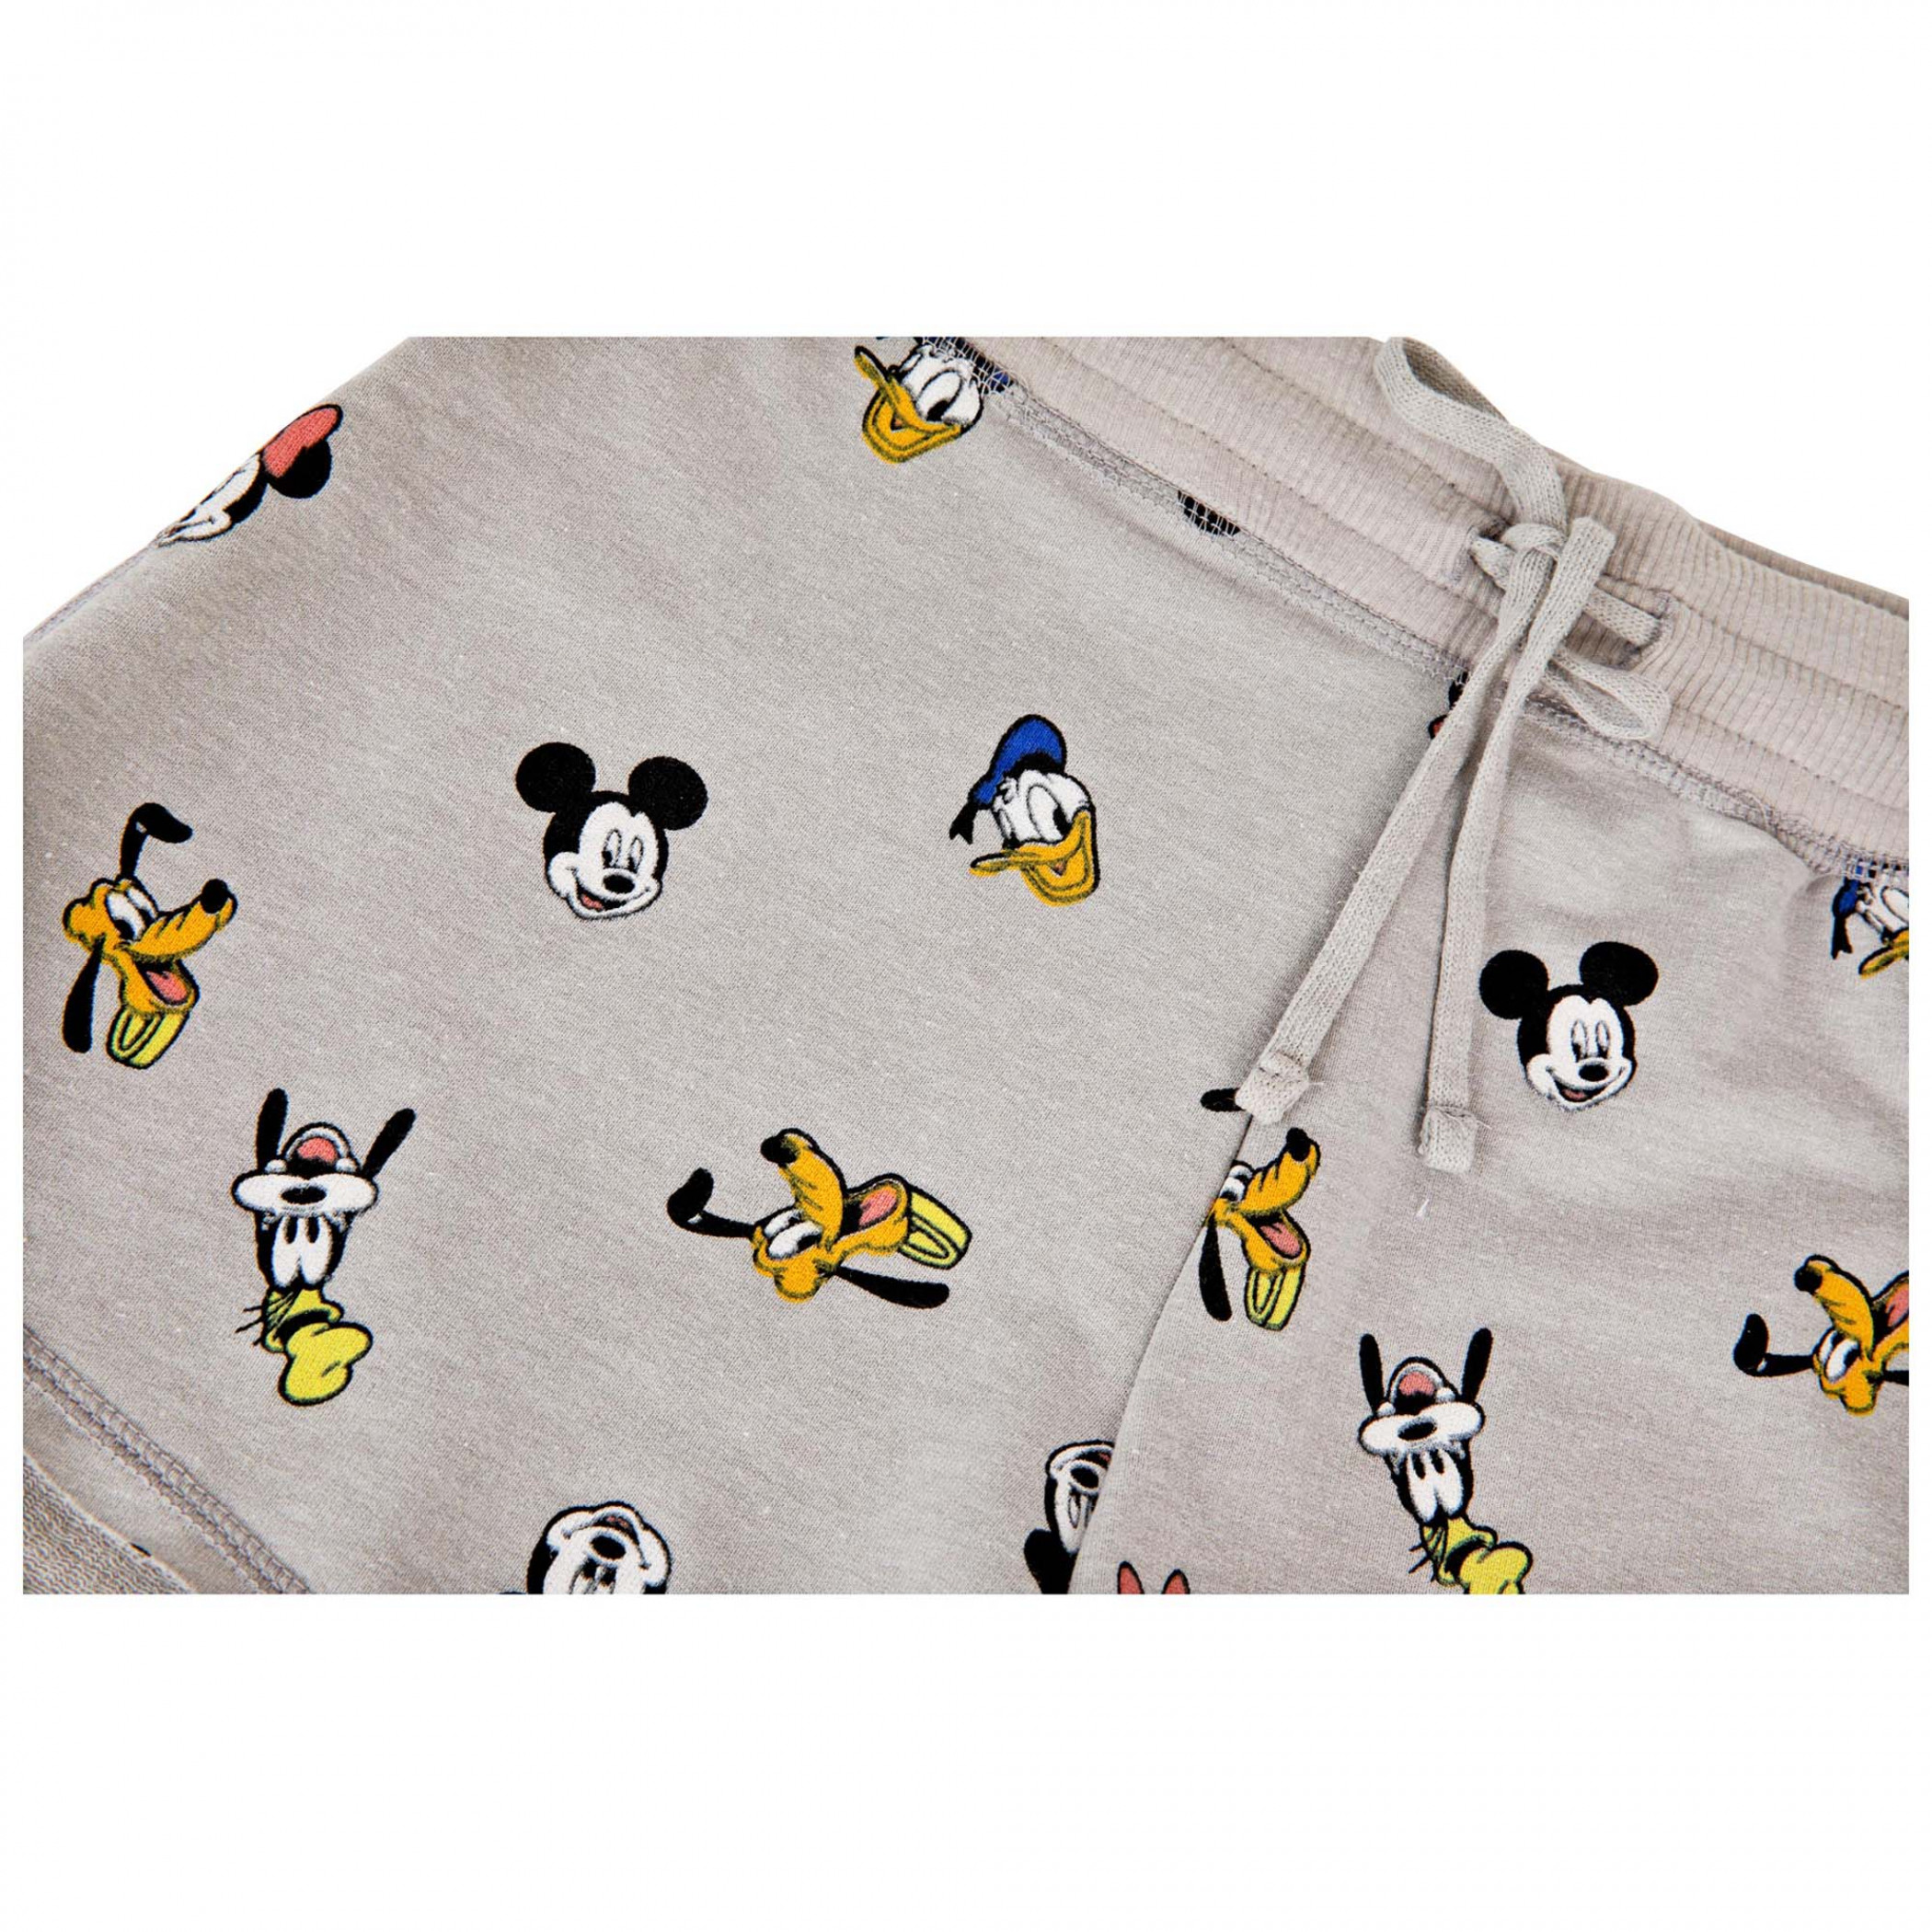 Disney Mickey Mouse and Friends Shorts 2-Set